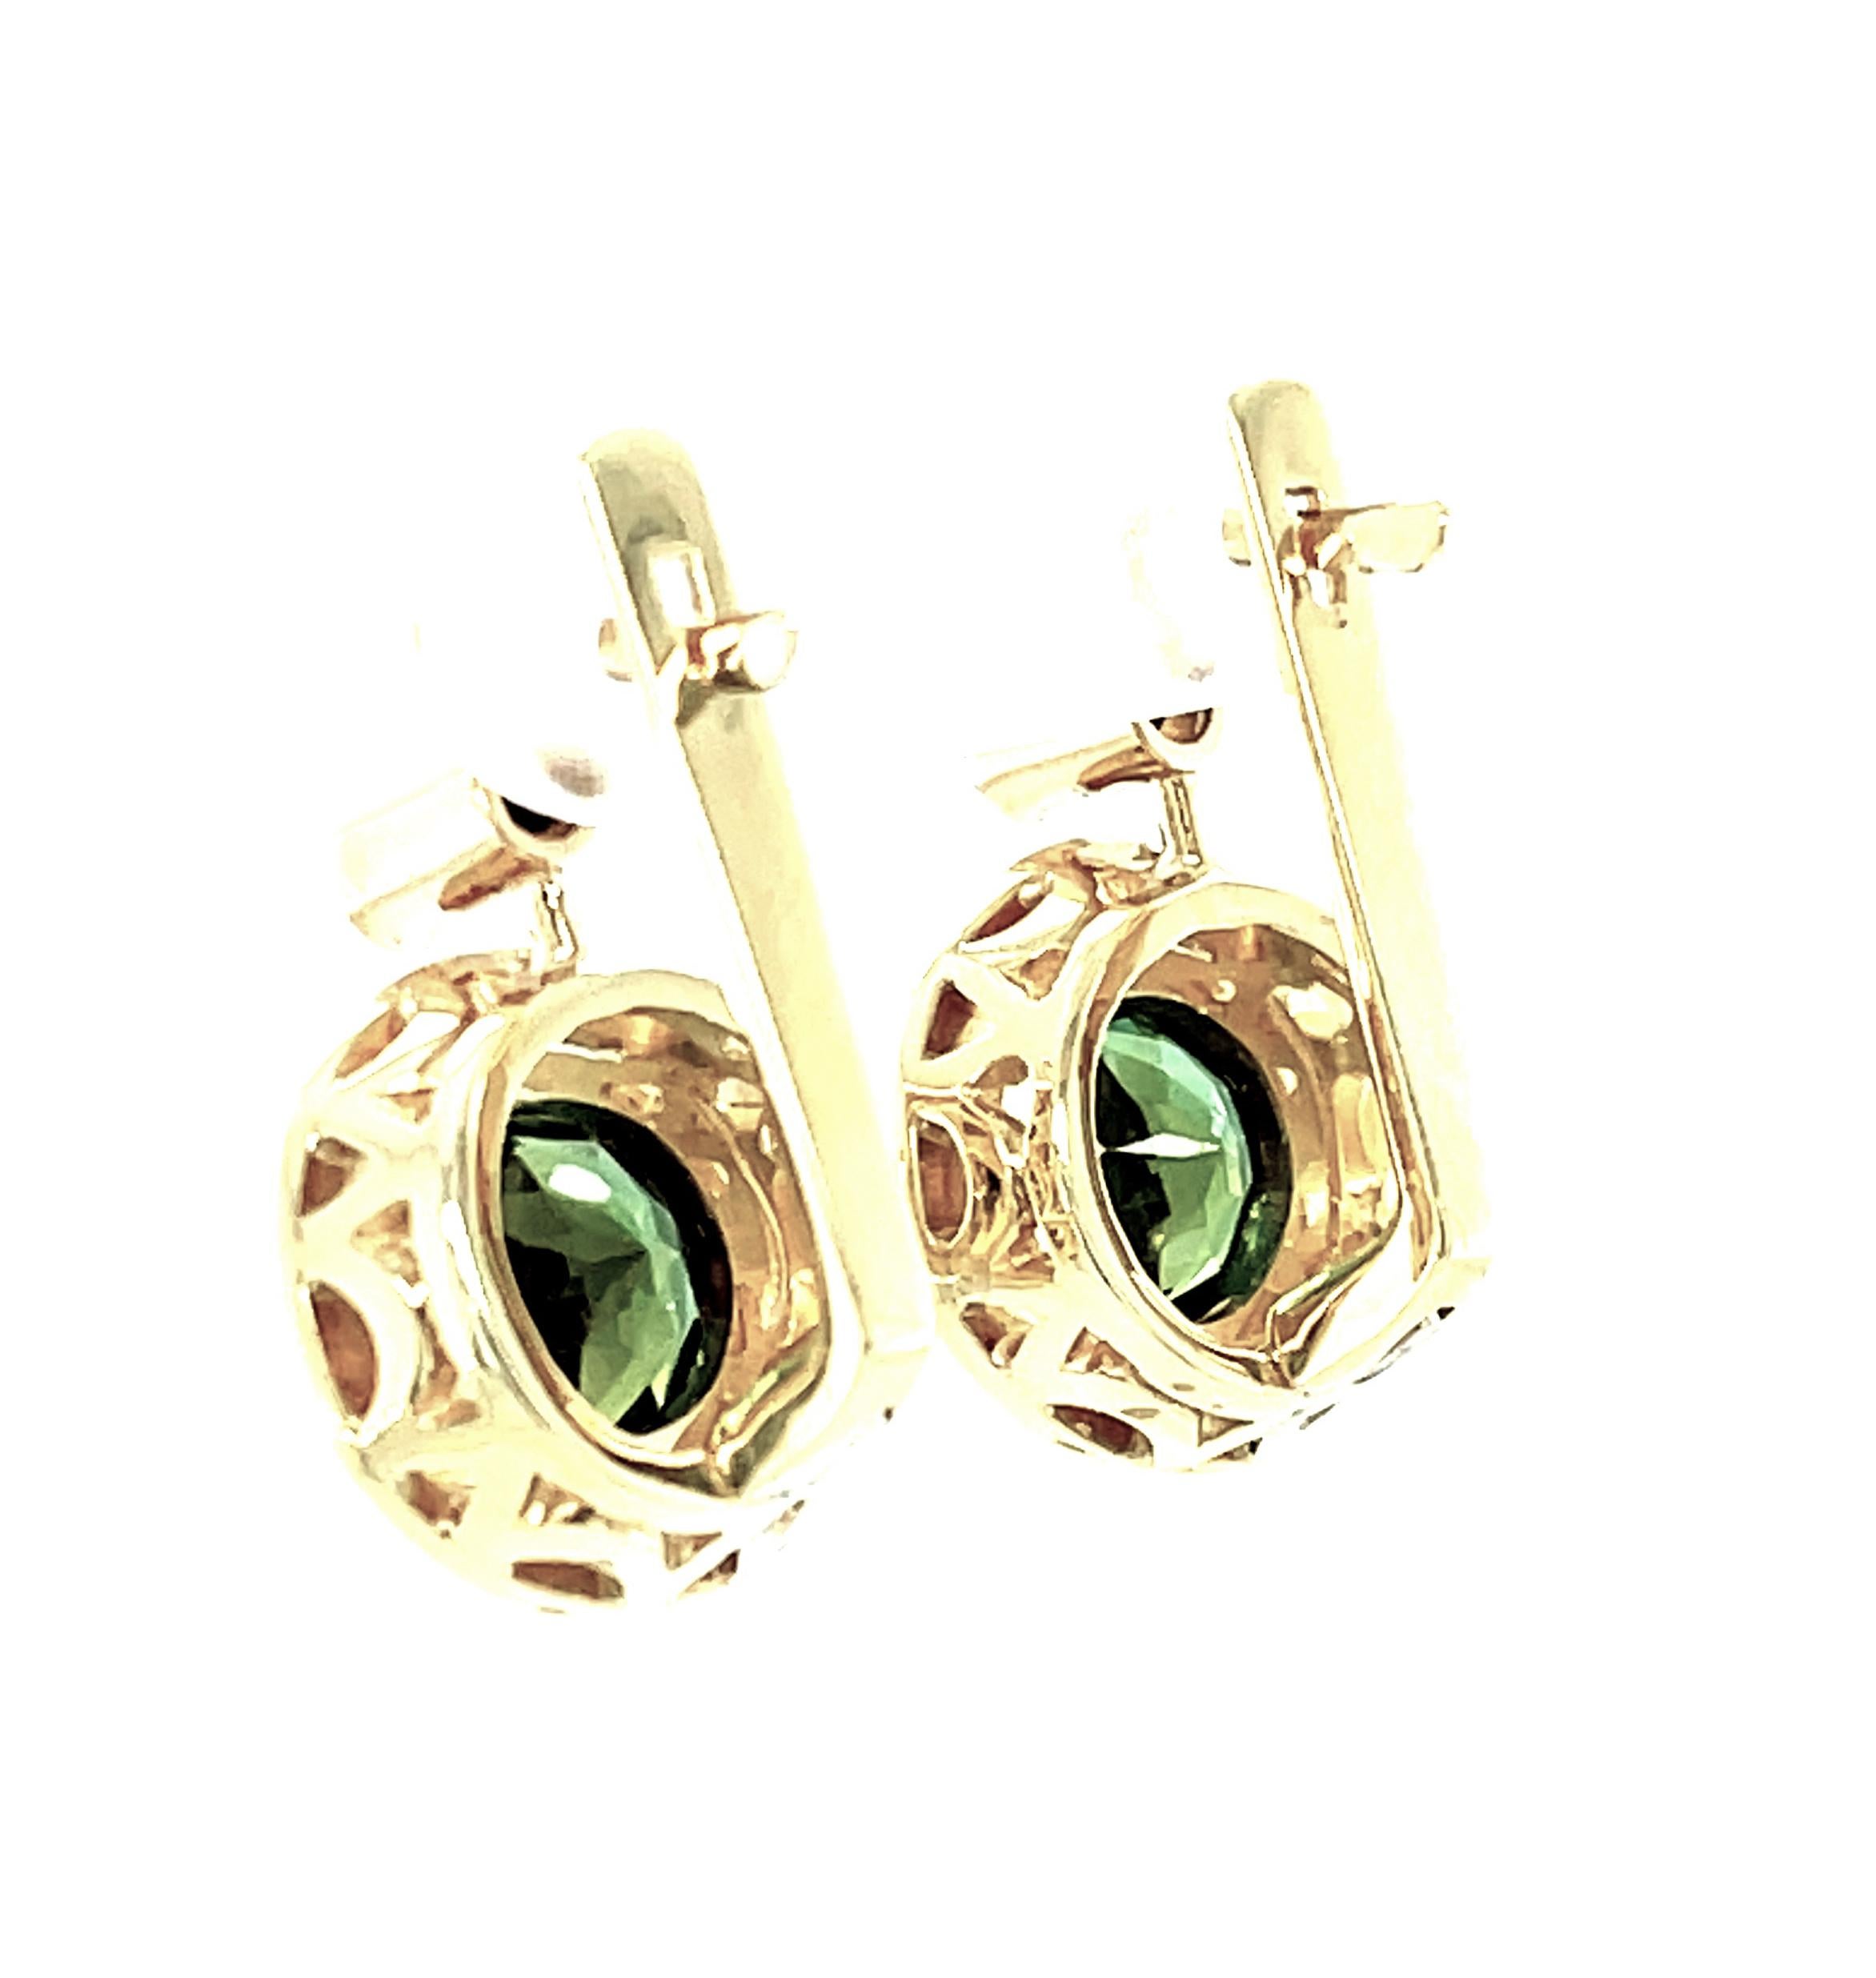 3.55 Carat Total Green Tourmaline and Diamond Drop Earrings in Yellow Gold For Sale 1